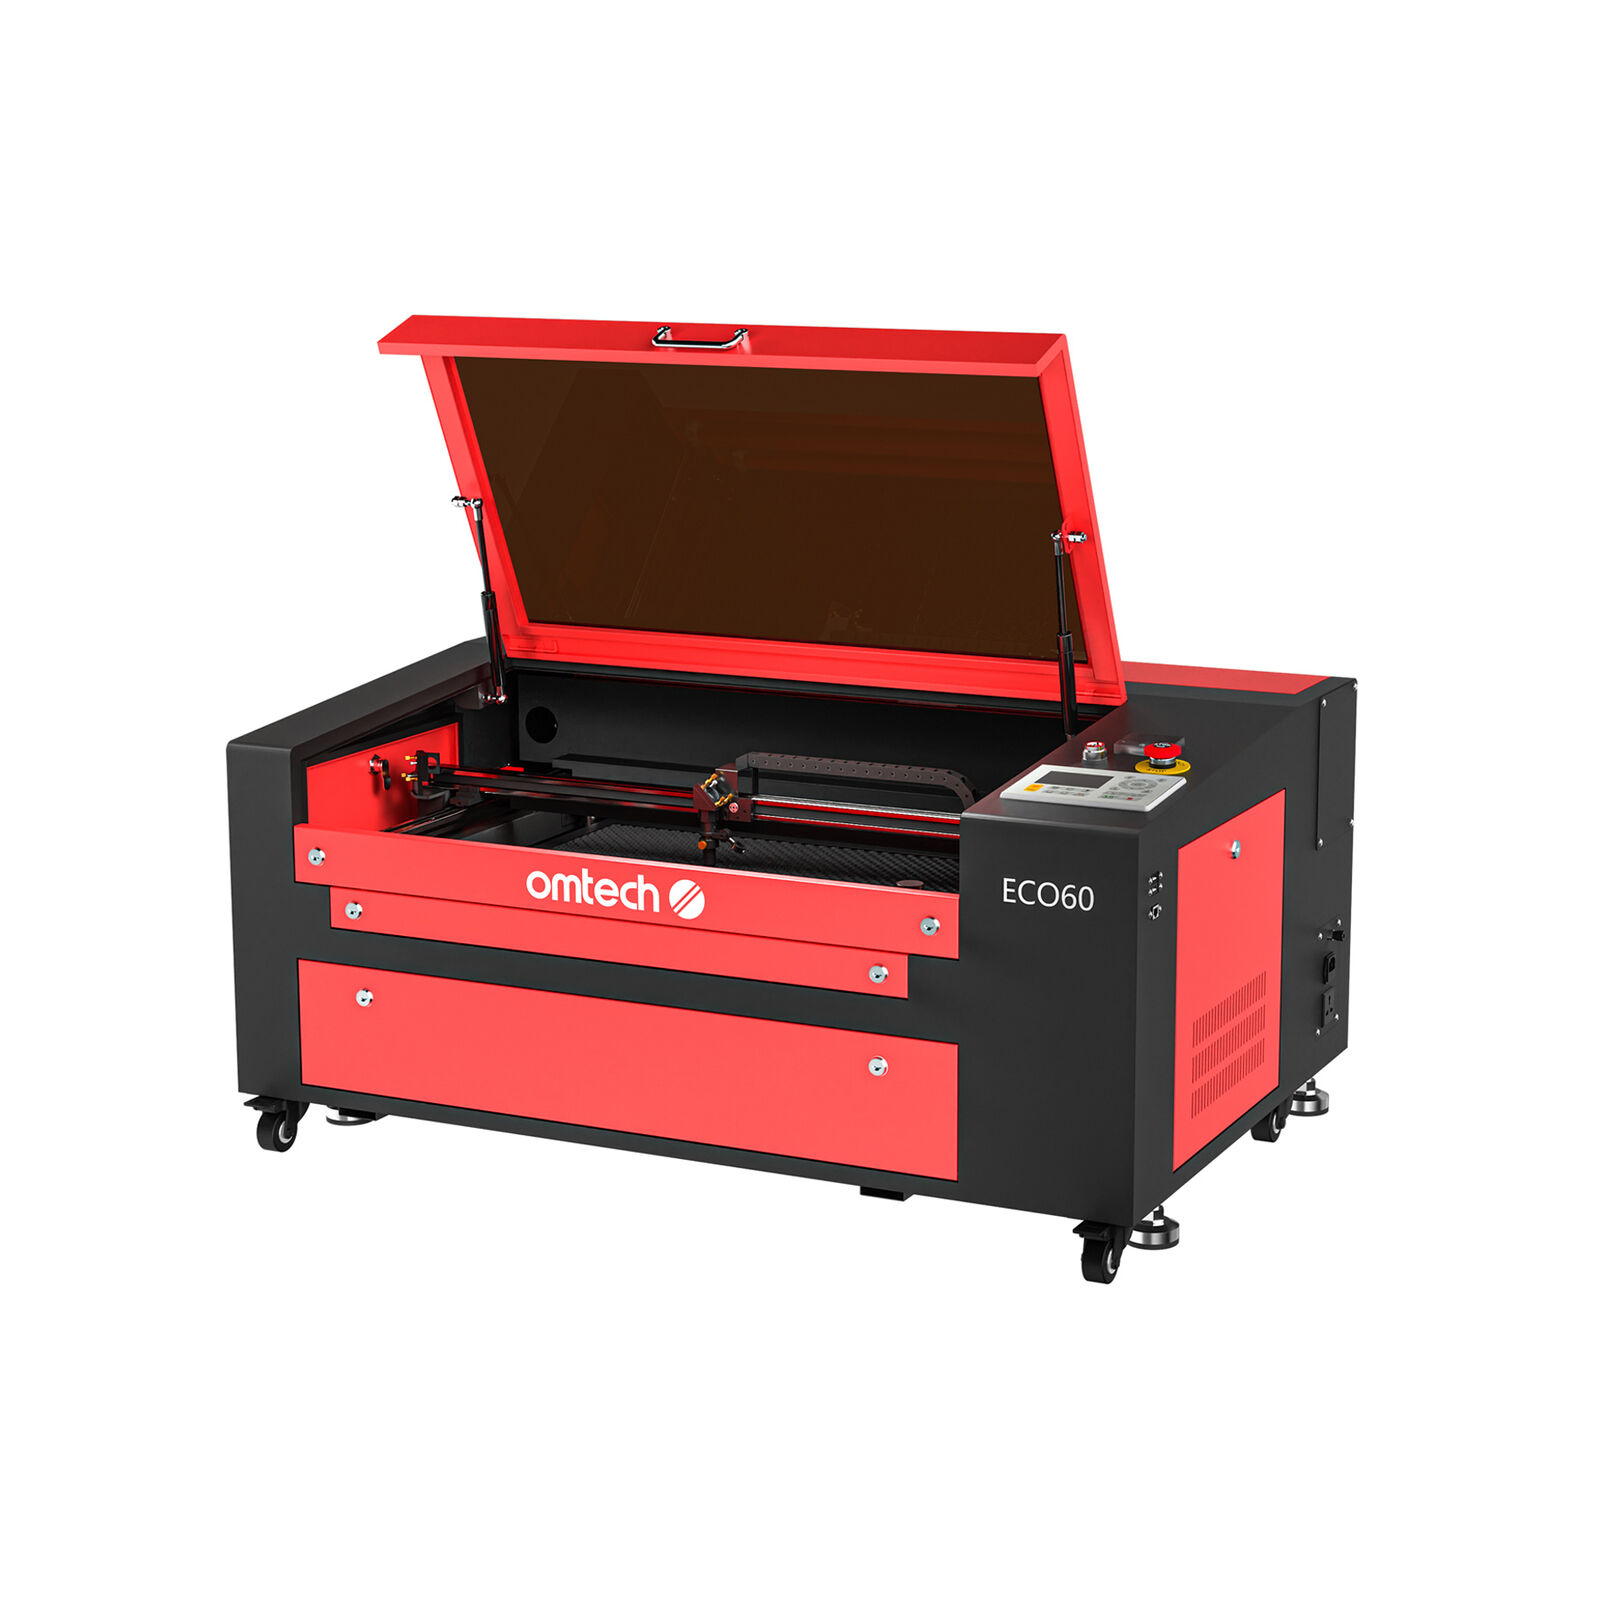 OMTech 60W 16x24 CO2 Laser Engraving Cutting Machine Engraver Cutter